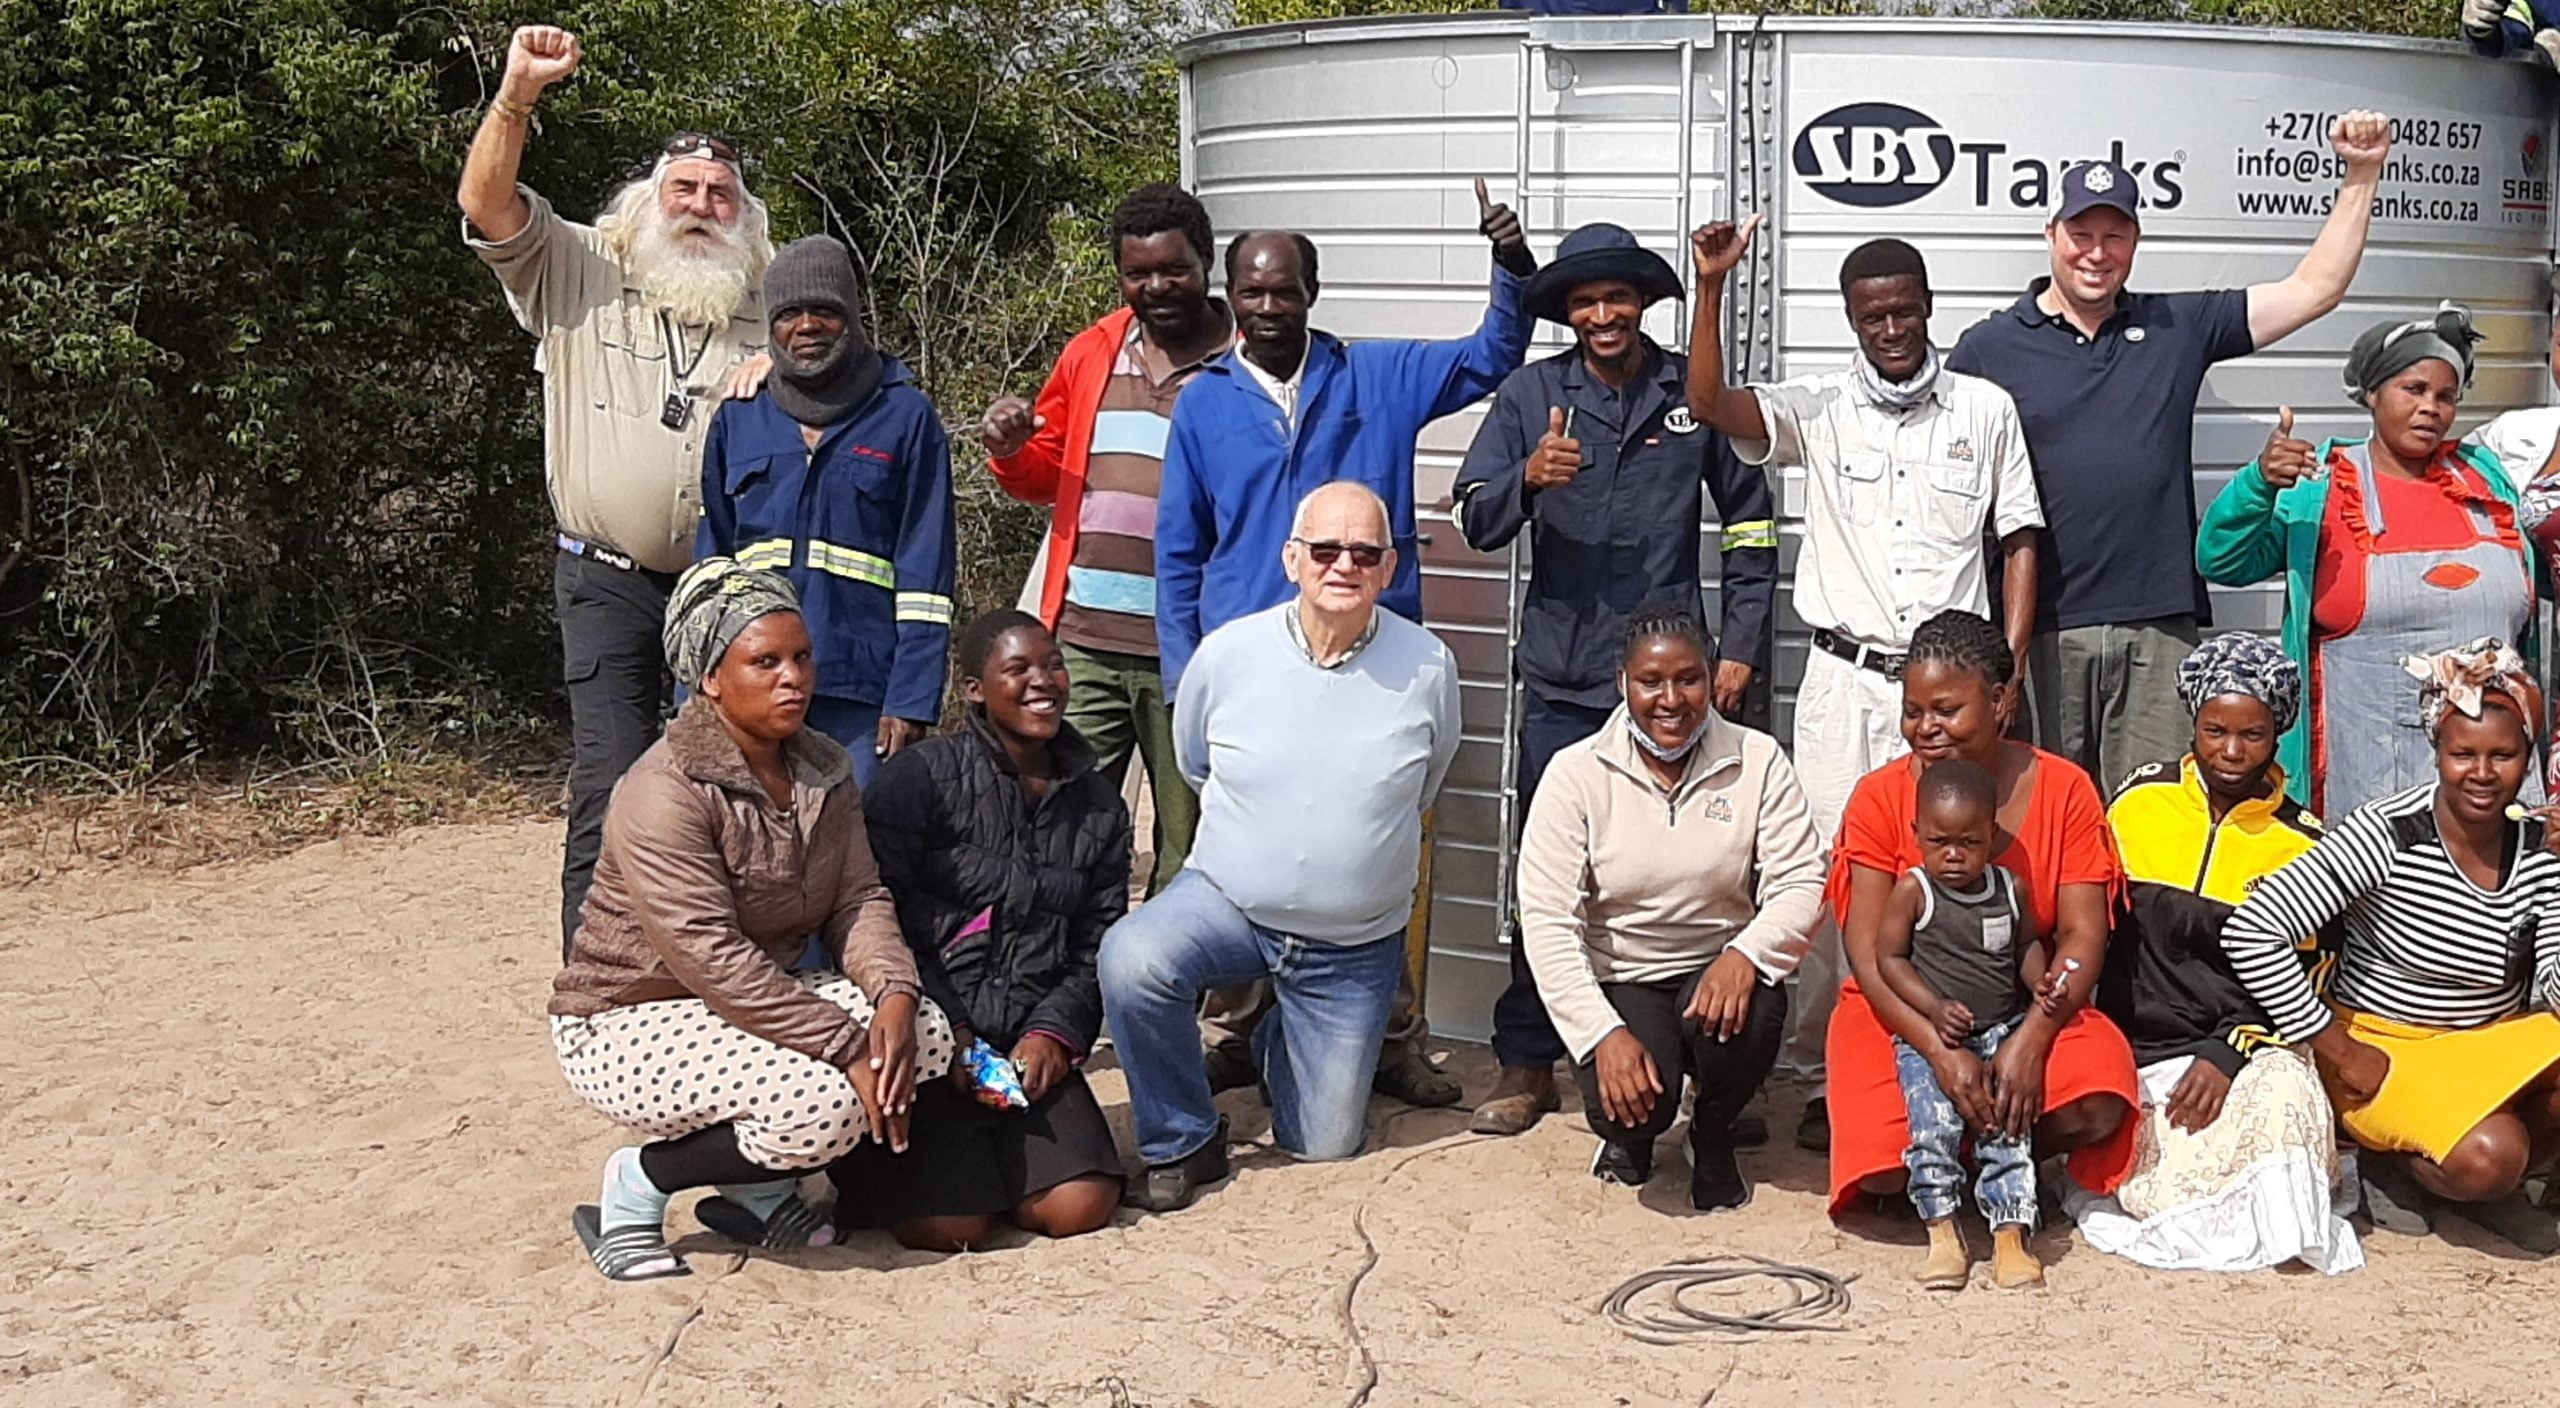 Kingsley Holgate reached out to SBS GM Chester Foster to assist the Tembe Community with the installation of a water tank Web scaled